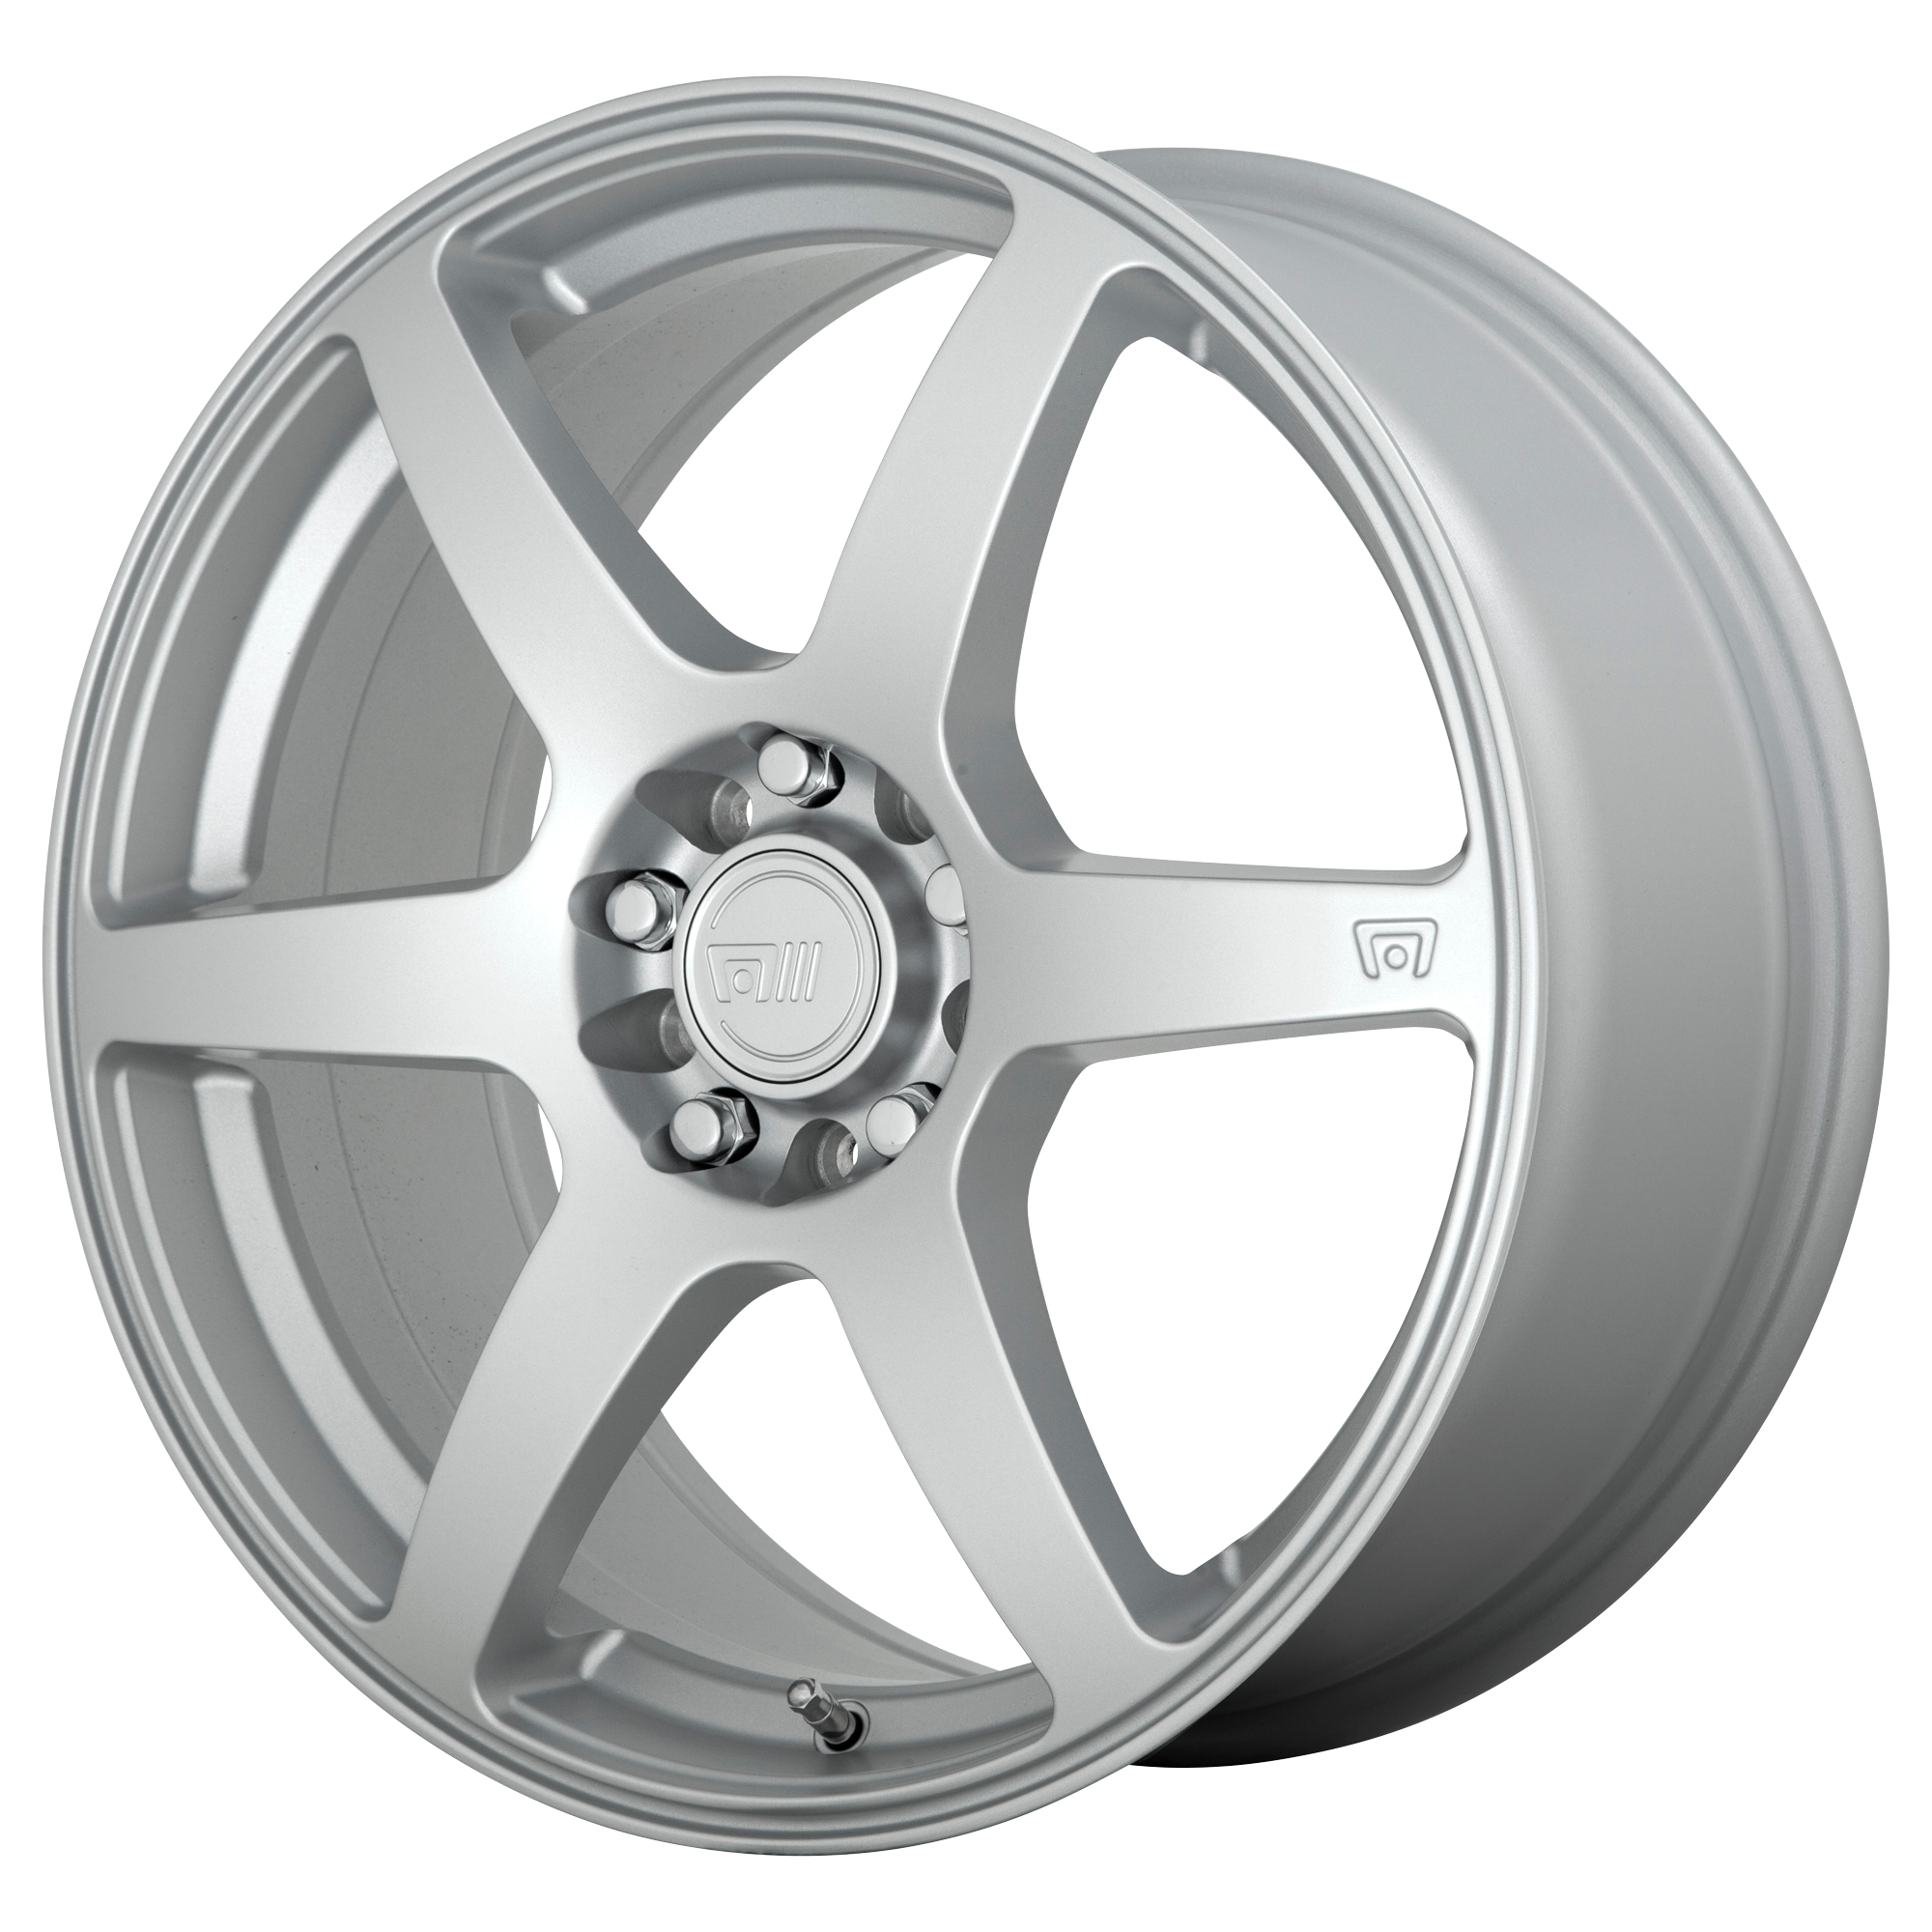 CS6 17x7 5x100.00/5x114.30 HYPER SILVER (40 mm) - Tires and Engine Performance